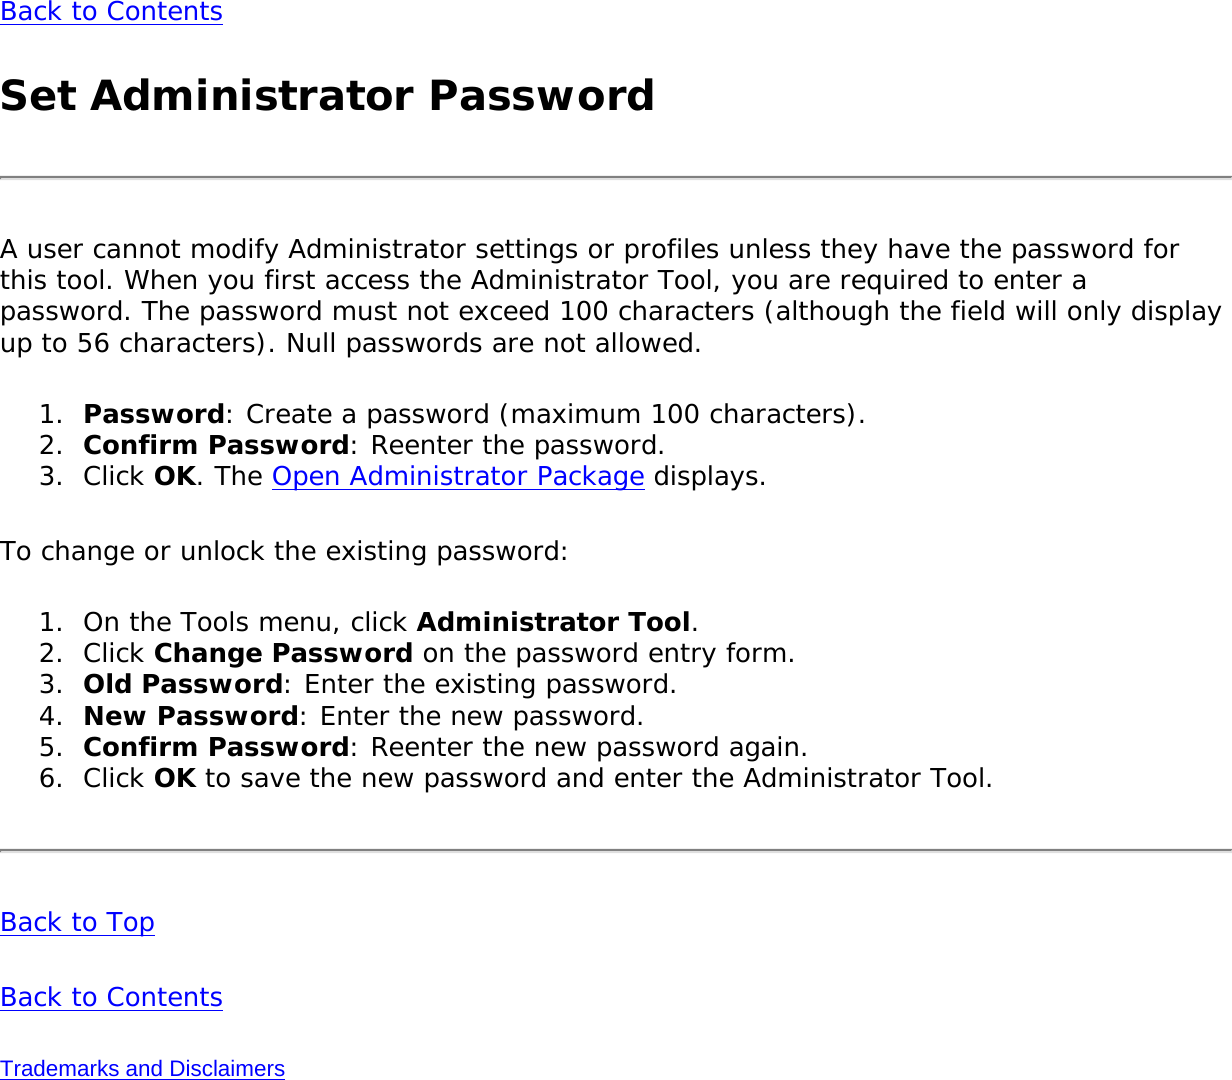 Back to ContentsSet Administrator PasswordA user cannot modify Administrator settings or profiles unless they have the password for this tool. When you first access the Administrator Tool, you are required to enter a password. The password must not exceed 100 characters (although the field will only display up to 56 characters). Null passwords are not allowed.1.  Password: Create a password (maximum 100 characters).2.  Confirm Password: Reenter the password.3.  Click OK. The Open Administrator Package displays.To change or unlock the existing password:1.  On the Tools menu, click Administrator Tool.2.  Click Change Password on the password entry form.3.  Old Password: Enter the existing password.4.  New Password: Enter the new password.5.  Confirm Password: Reenter the new password again.6.  Click OK to save the new password and enter the Administrator Tool.Back to TopBack to ContentsTrademarks and Disclaimers